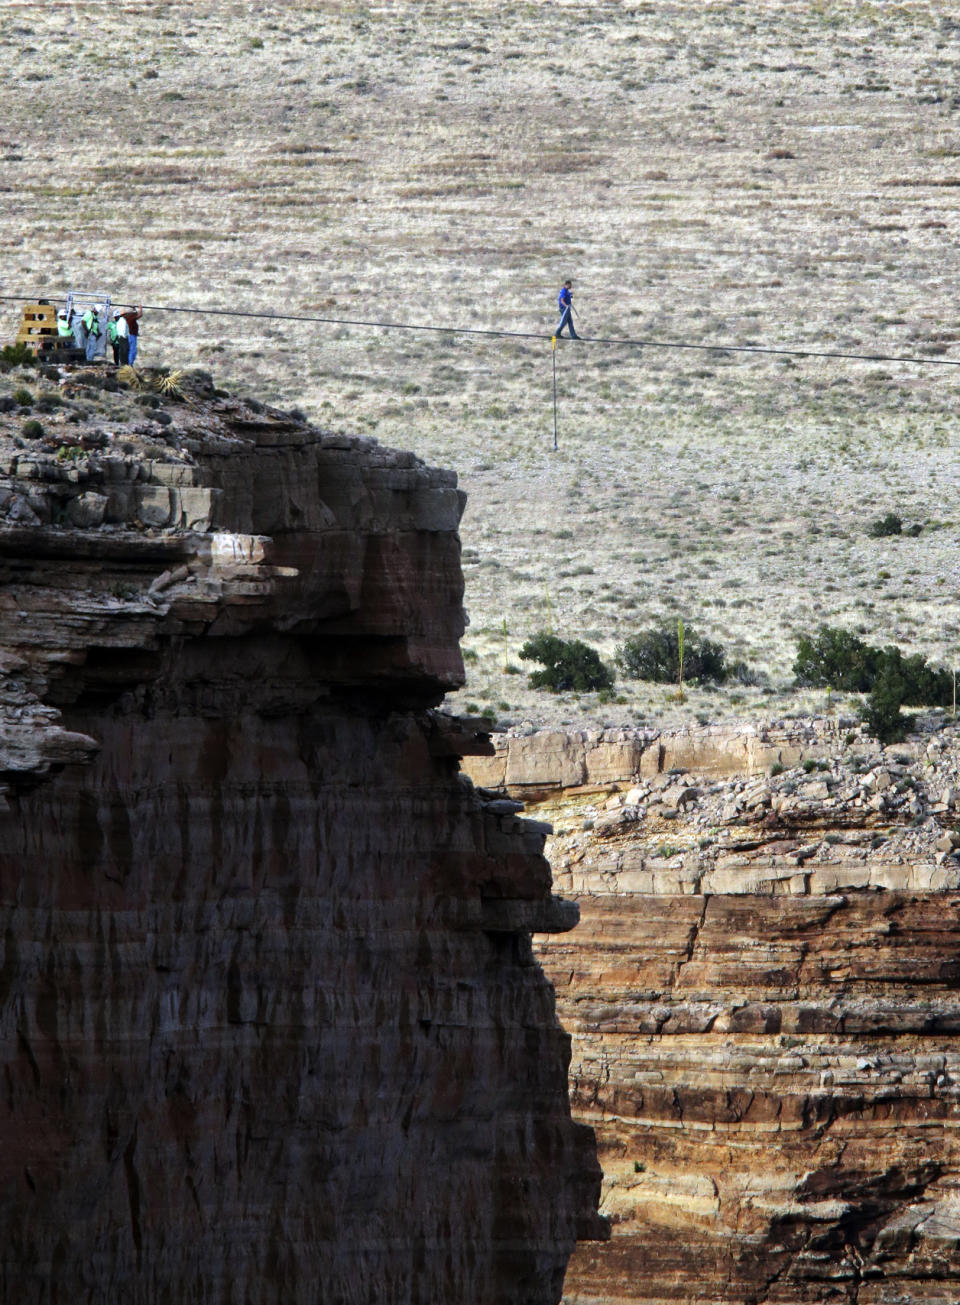 FILE - In this June 23, 2013, file photo, daredevil Nik Wallenda crosses a tightrope 1,500 feet above the Little Colorado River Gorge, Ariz., on the Navajo Nation outside the boundaries of Grand Canyon National Park. When actor Will Smith turns 50 on Tuesday, Sept. 25, 2018, he will jump head-first into the big milestone. The “Fresh Prince” plans to bungee jump from a helicopter over a gorge just outside Grand Canyon National Park. His birthday activity is the latest in a vast history of outrageous stunts staged in and around one of the world’s seven natural wonders. (AP Photo/Rick Bowmer, File)